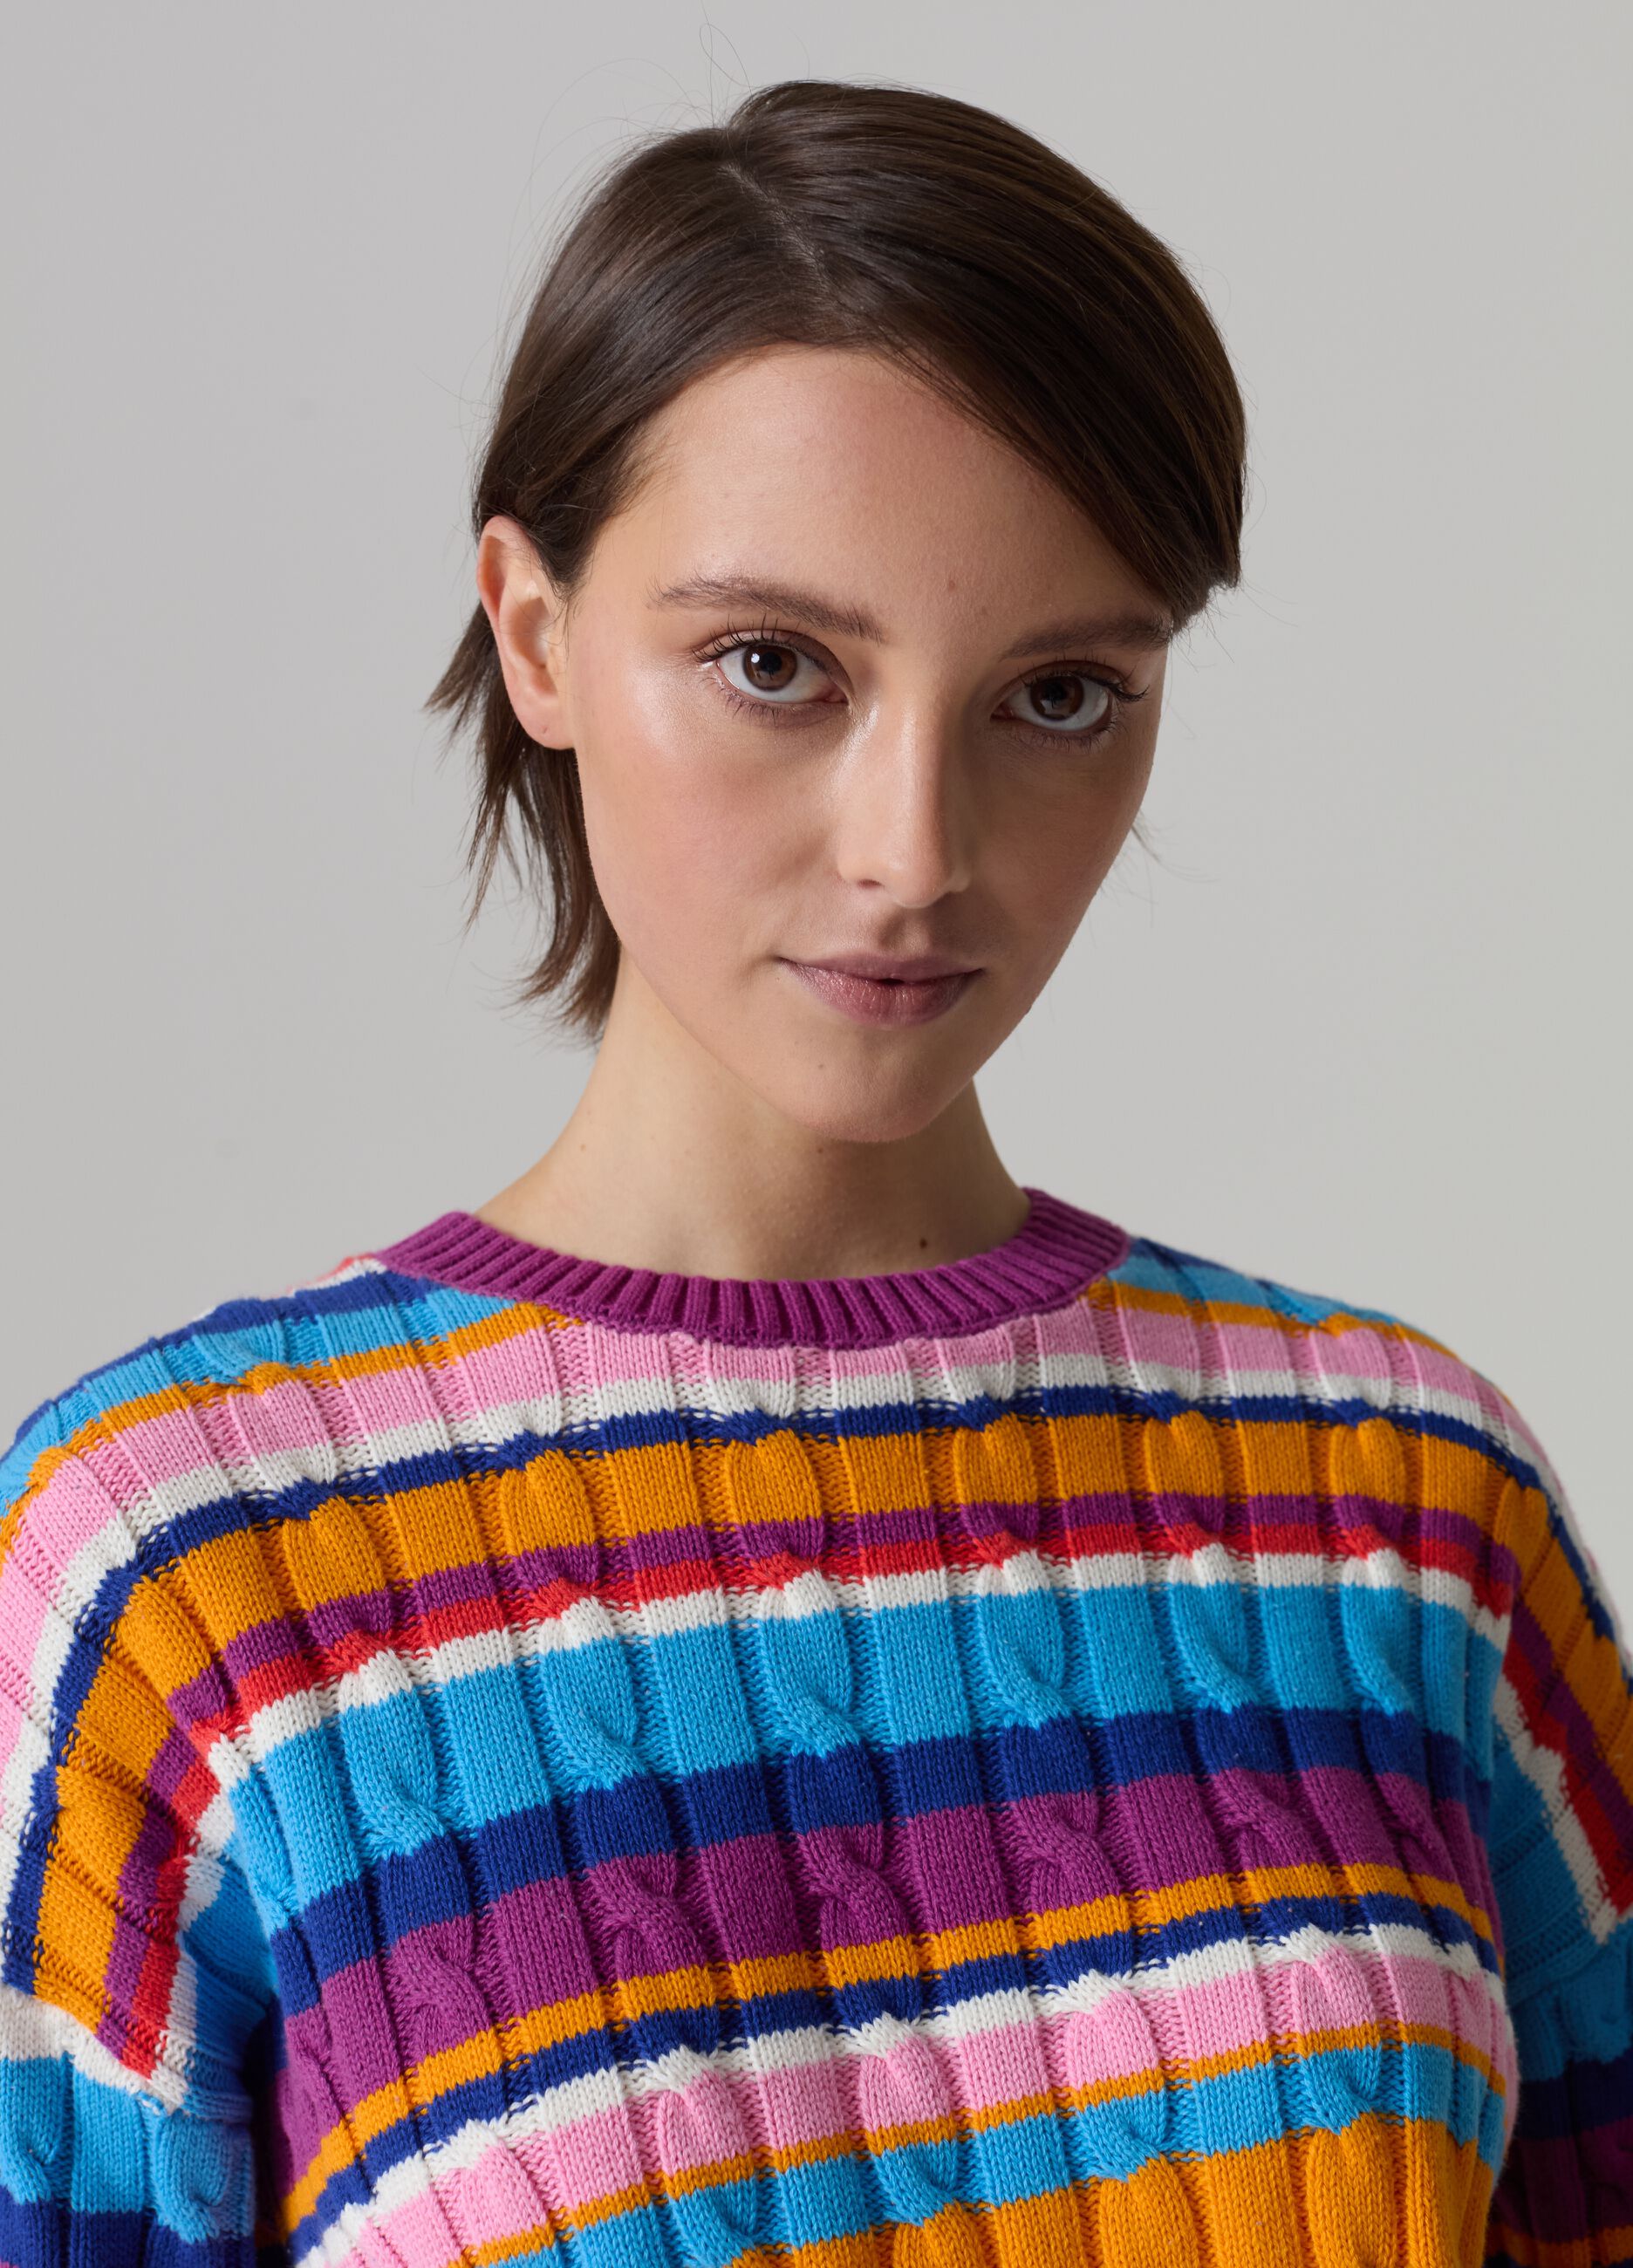 Striped pullover with cable-knit design